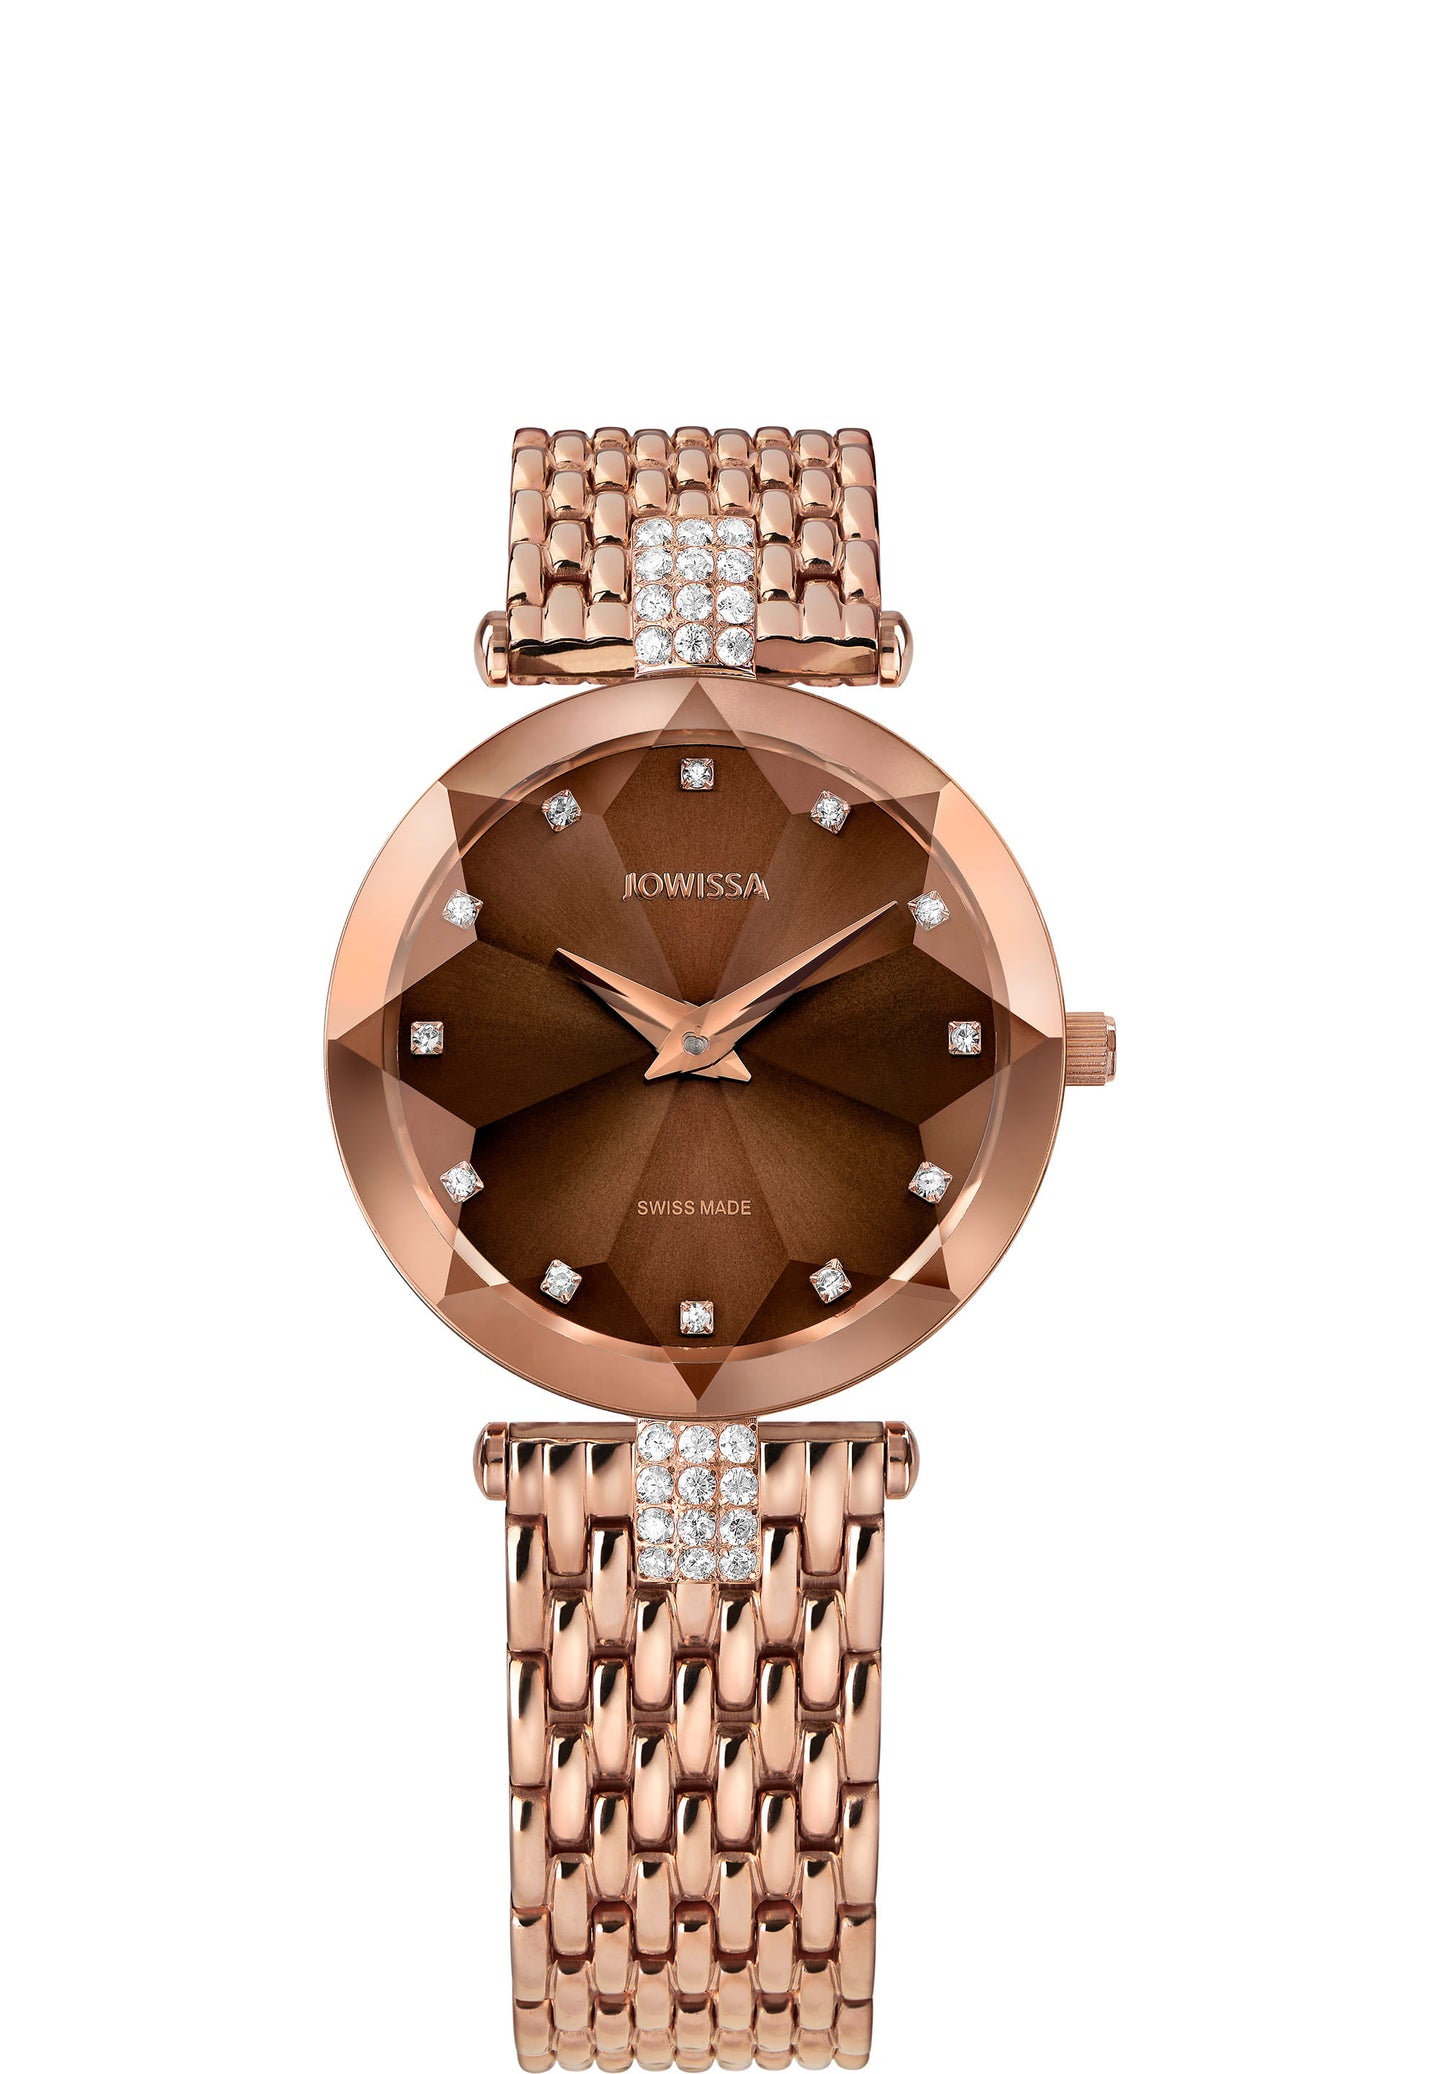 Facet Strass Reloj Mujer Suizo J5.724.M